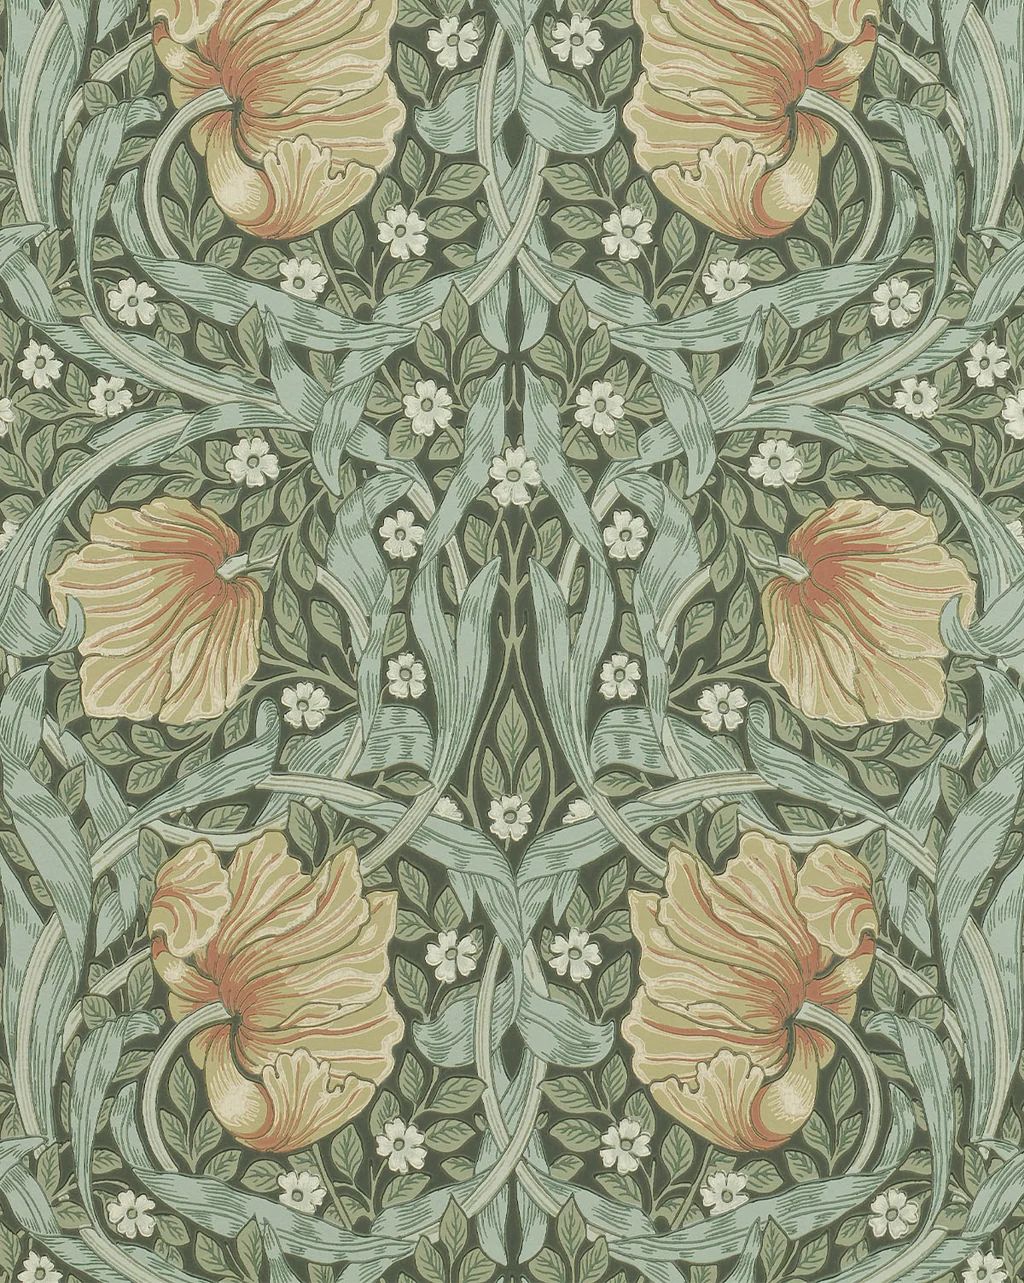 Pimpernel Wallpaper By William Morris | McGee & Co.